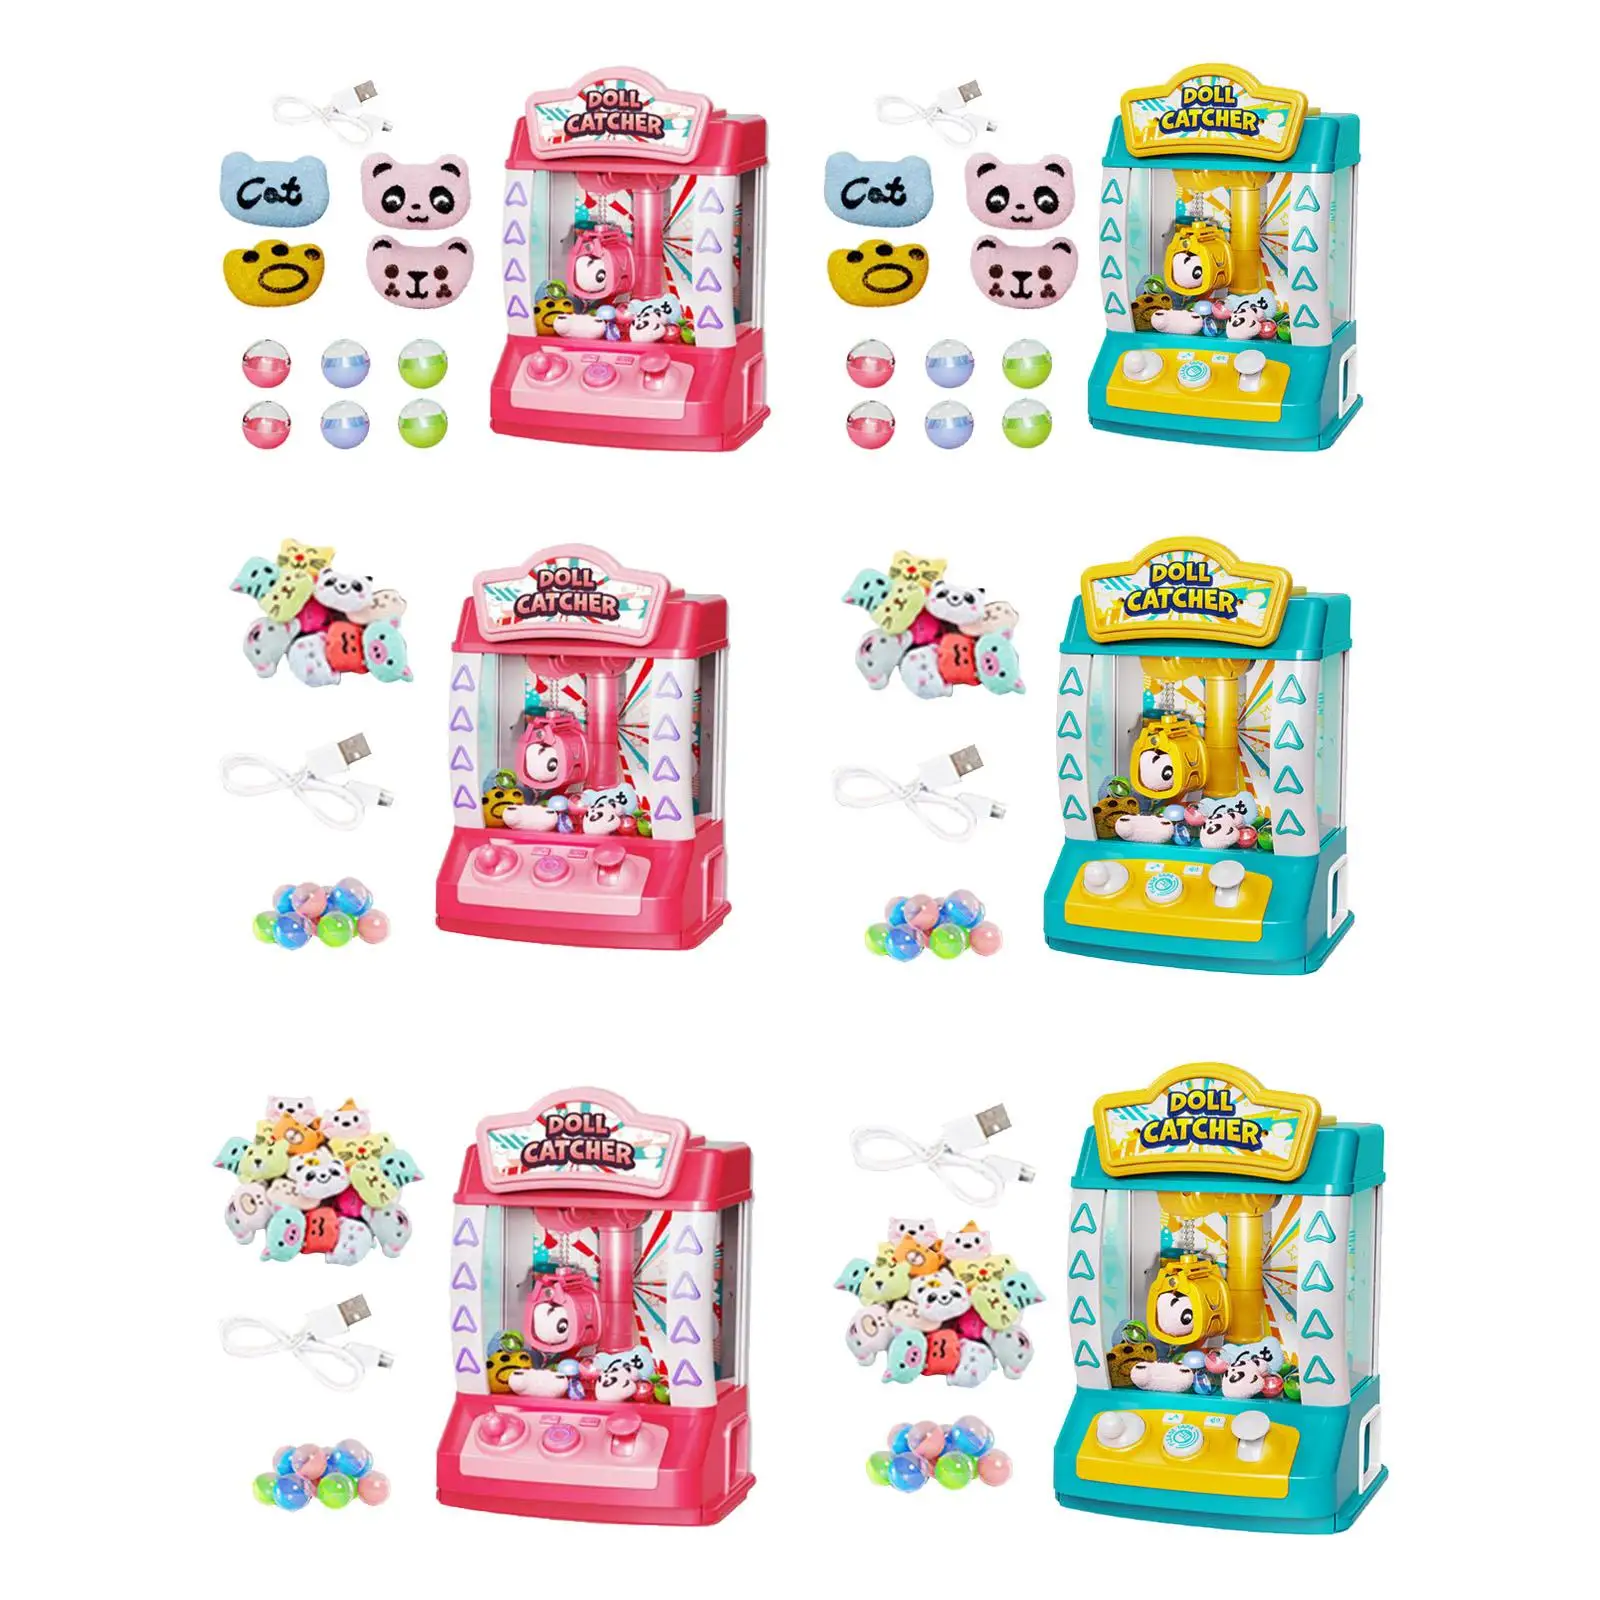 Arcade Candy Capsule Claw Game Prizes Toy Valentine`s Day Gifts Claw Machine Arcade Game for Adults Kids Home Children Toddlers